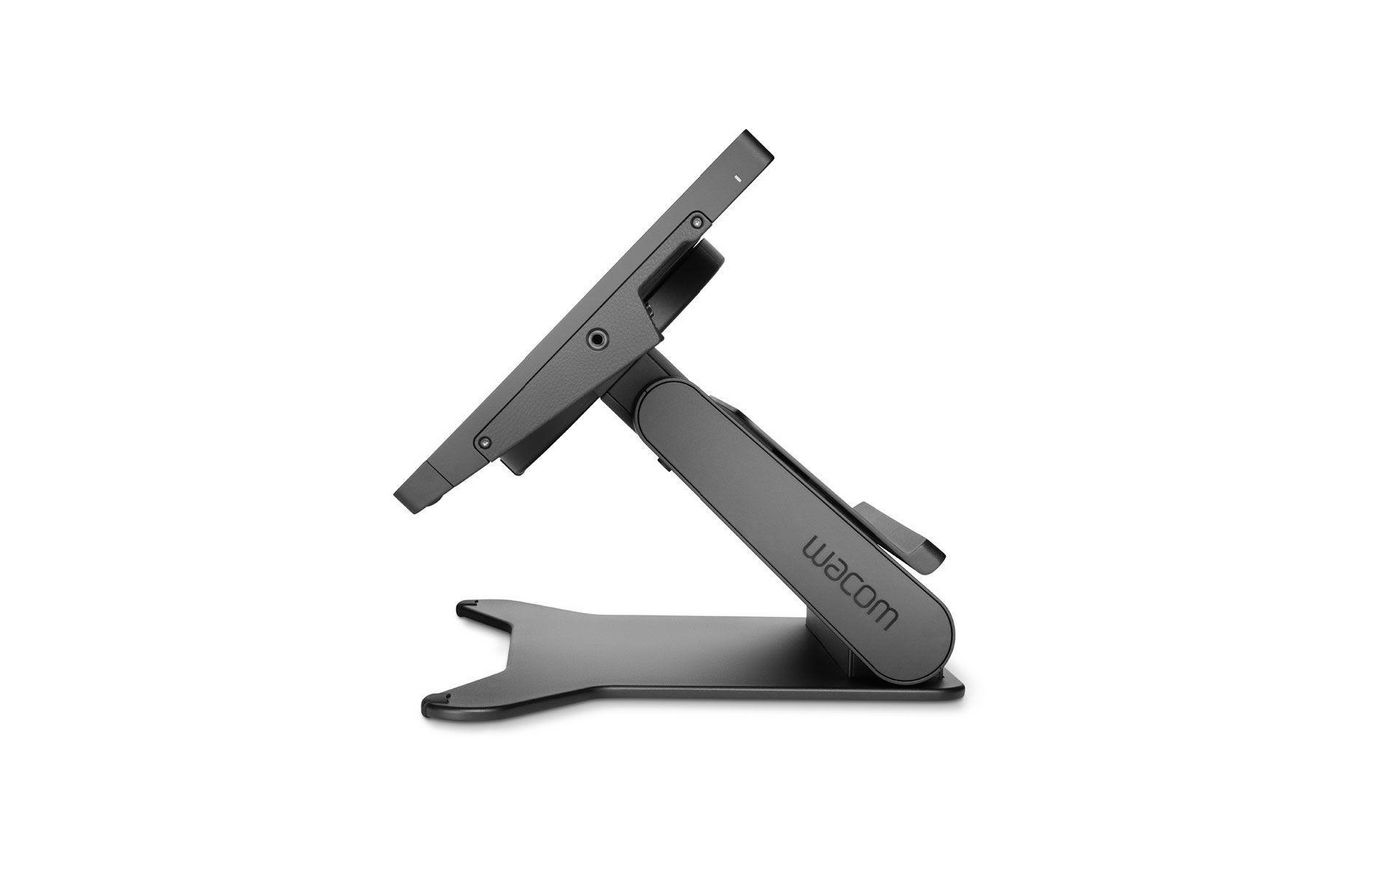 Photos - Other for Computer Wacom Cintiq Pro 22 Stand ACK64803KZ 